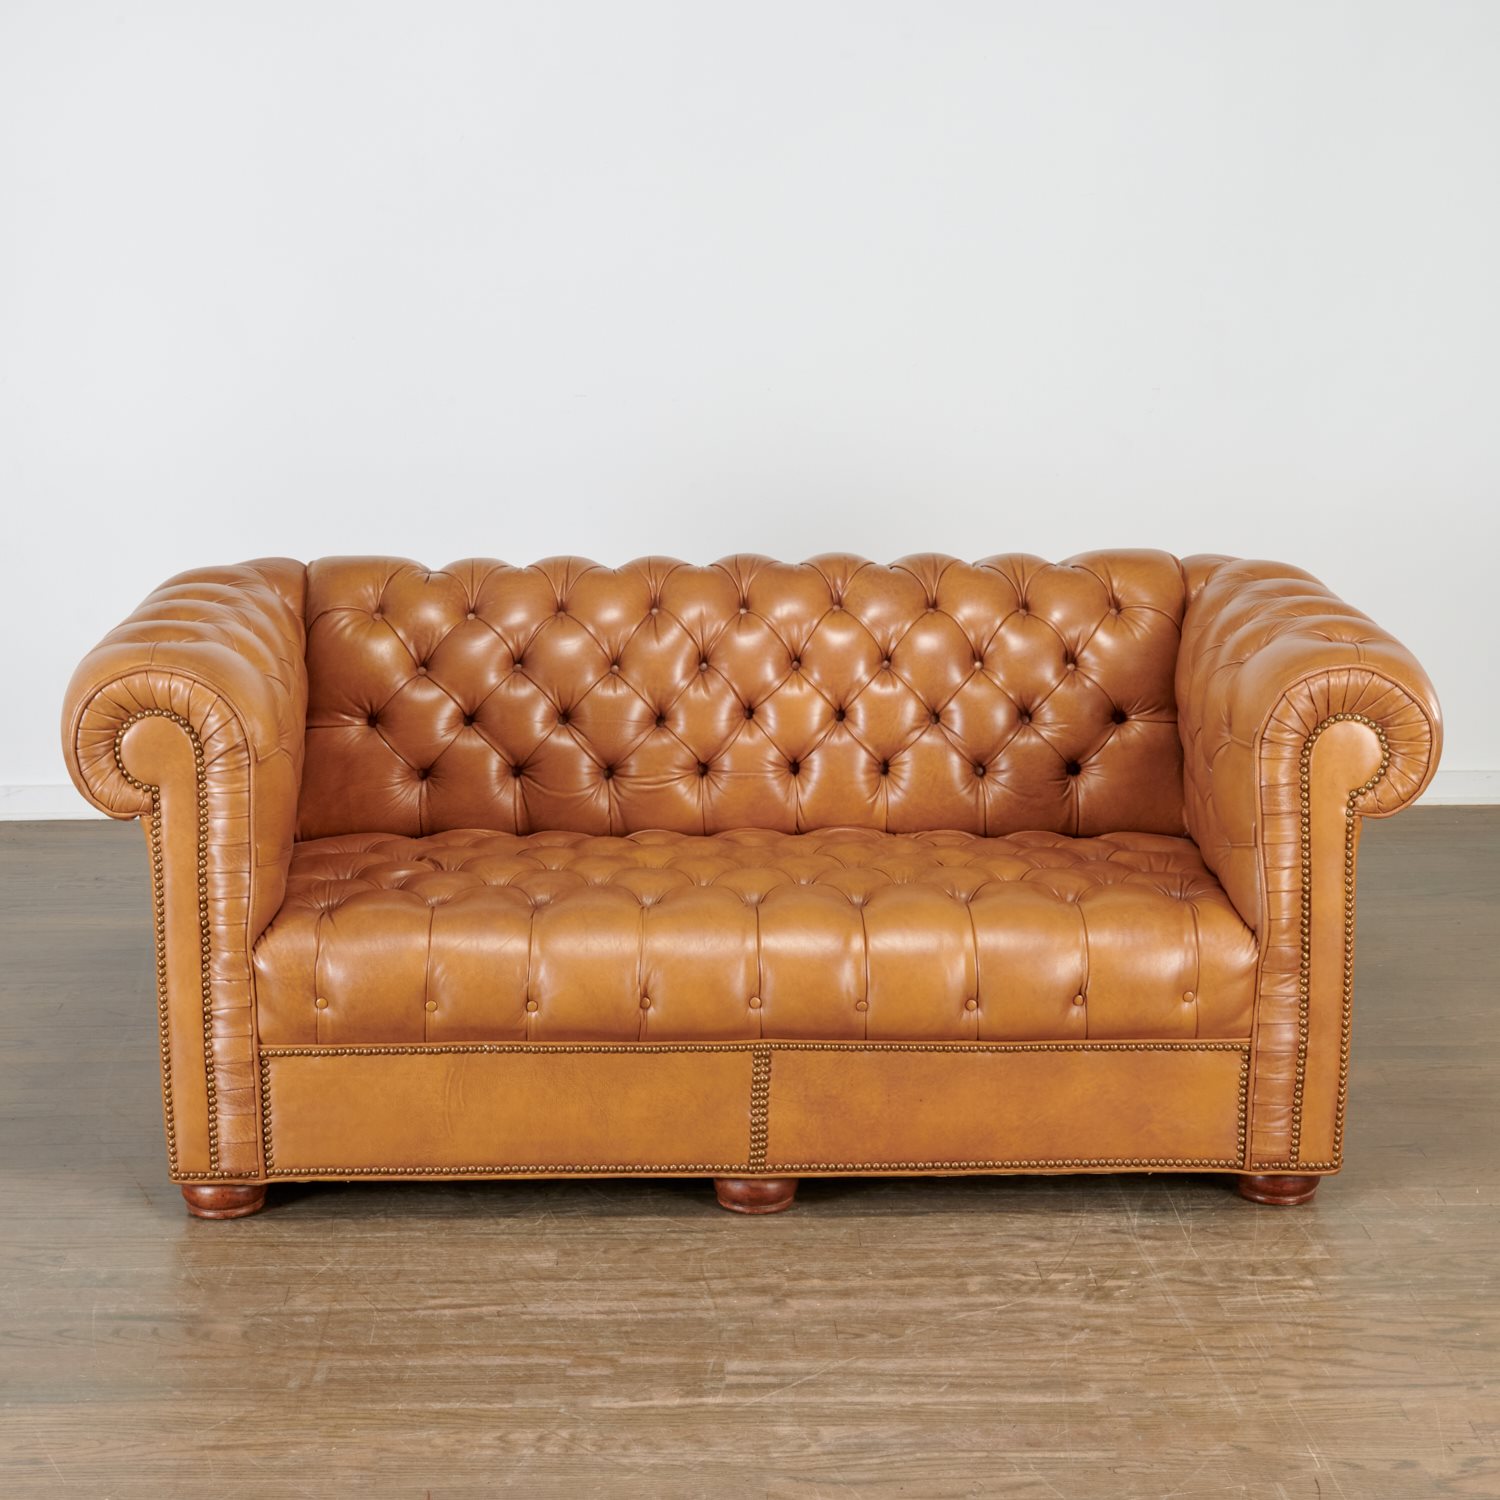 NICE QUALITY LEATHER CHESTERFIELD 2cdf7c